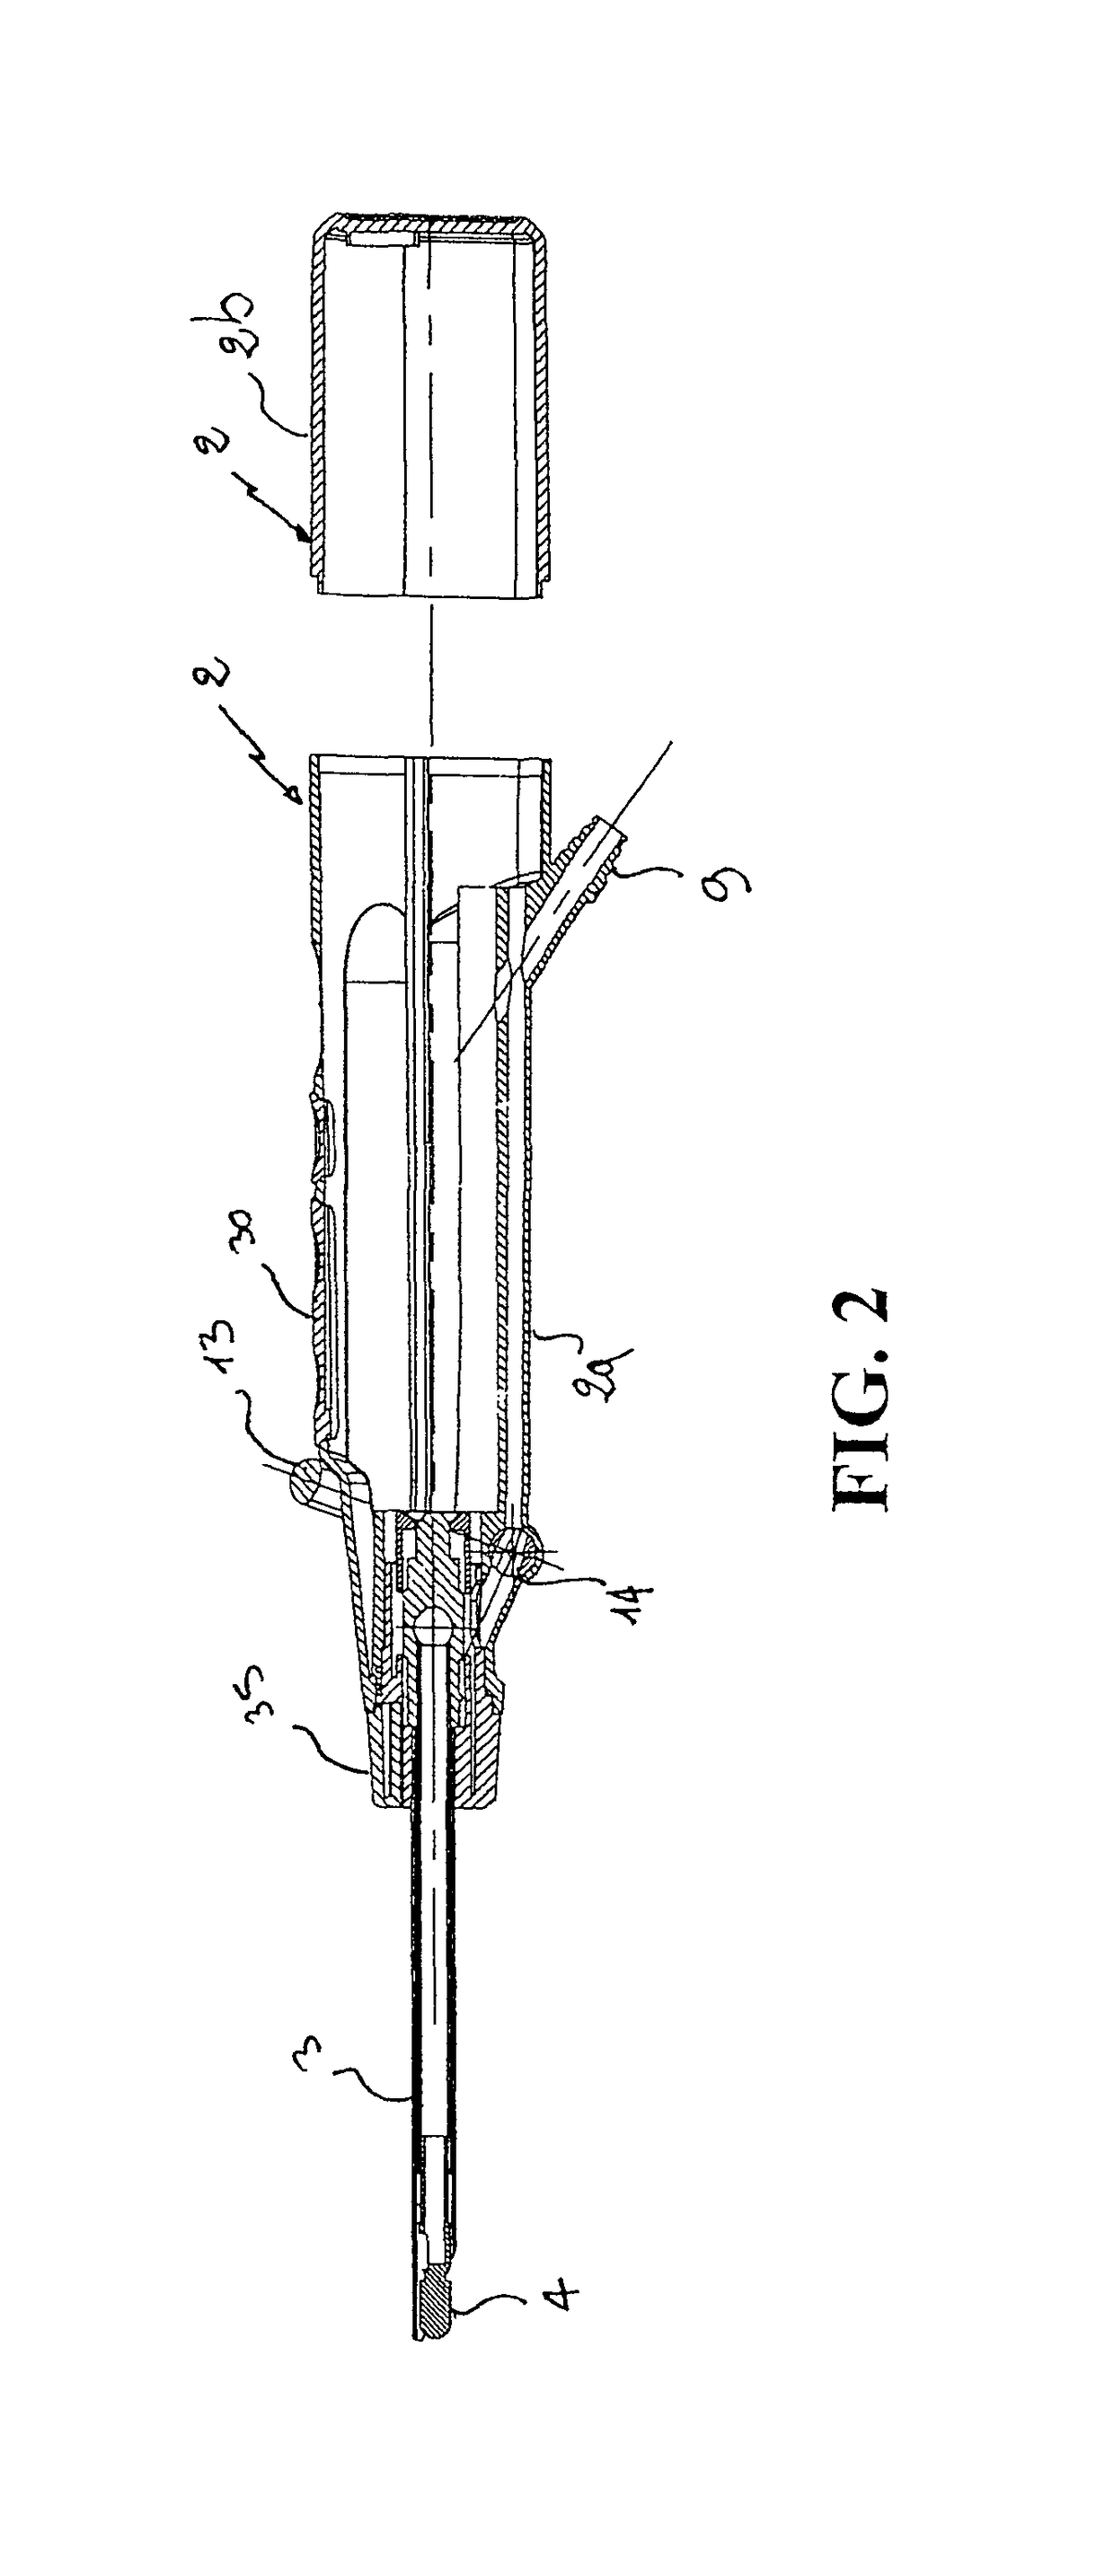 Device for endoscopic resection or removal of tissue